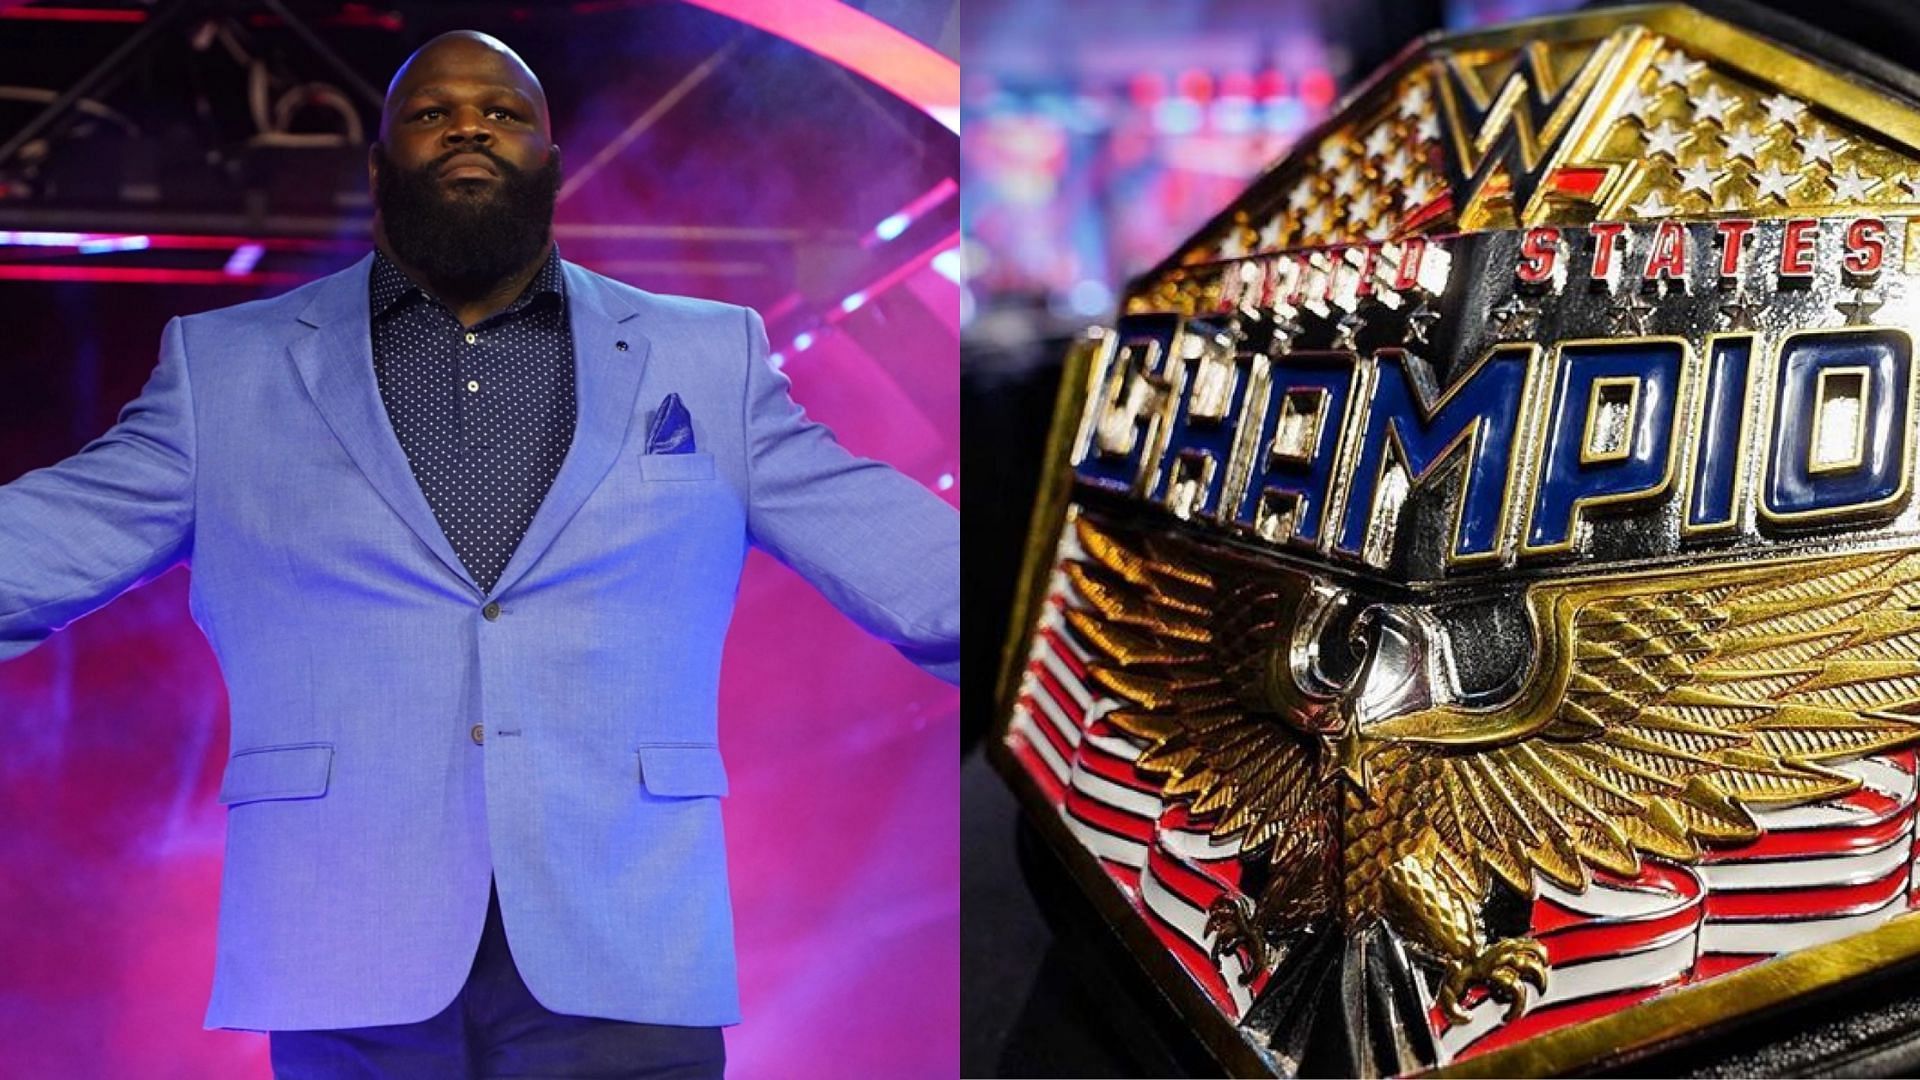 Could this veteran take up a similar role to Mark Henry once he retires?